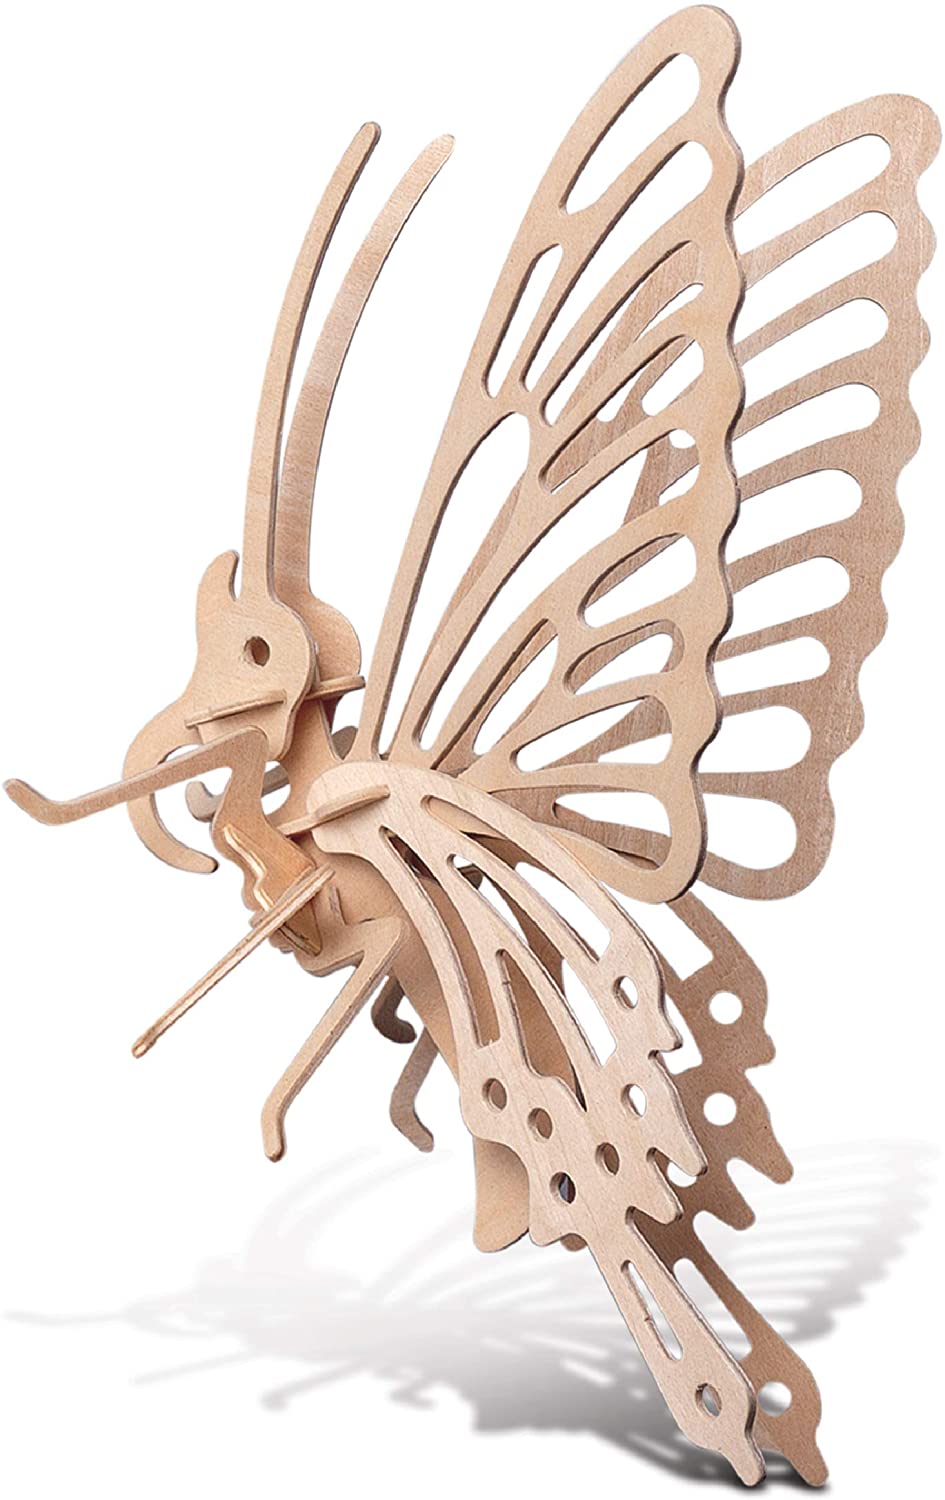 The Butterfly Woodcraft Construction Wooden 3D Model Kit 3D Puzzle 